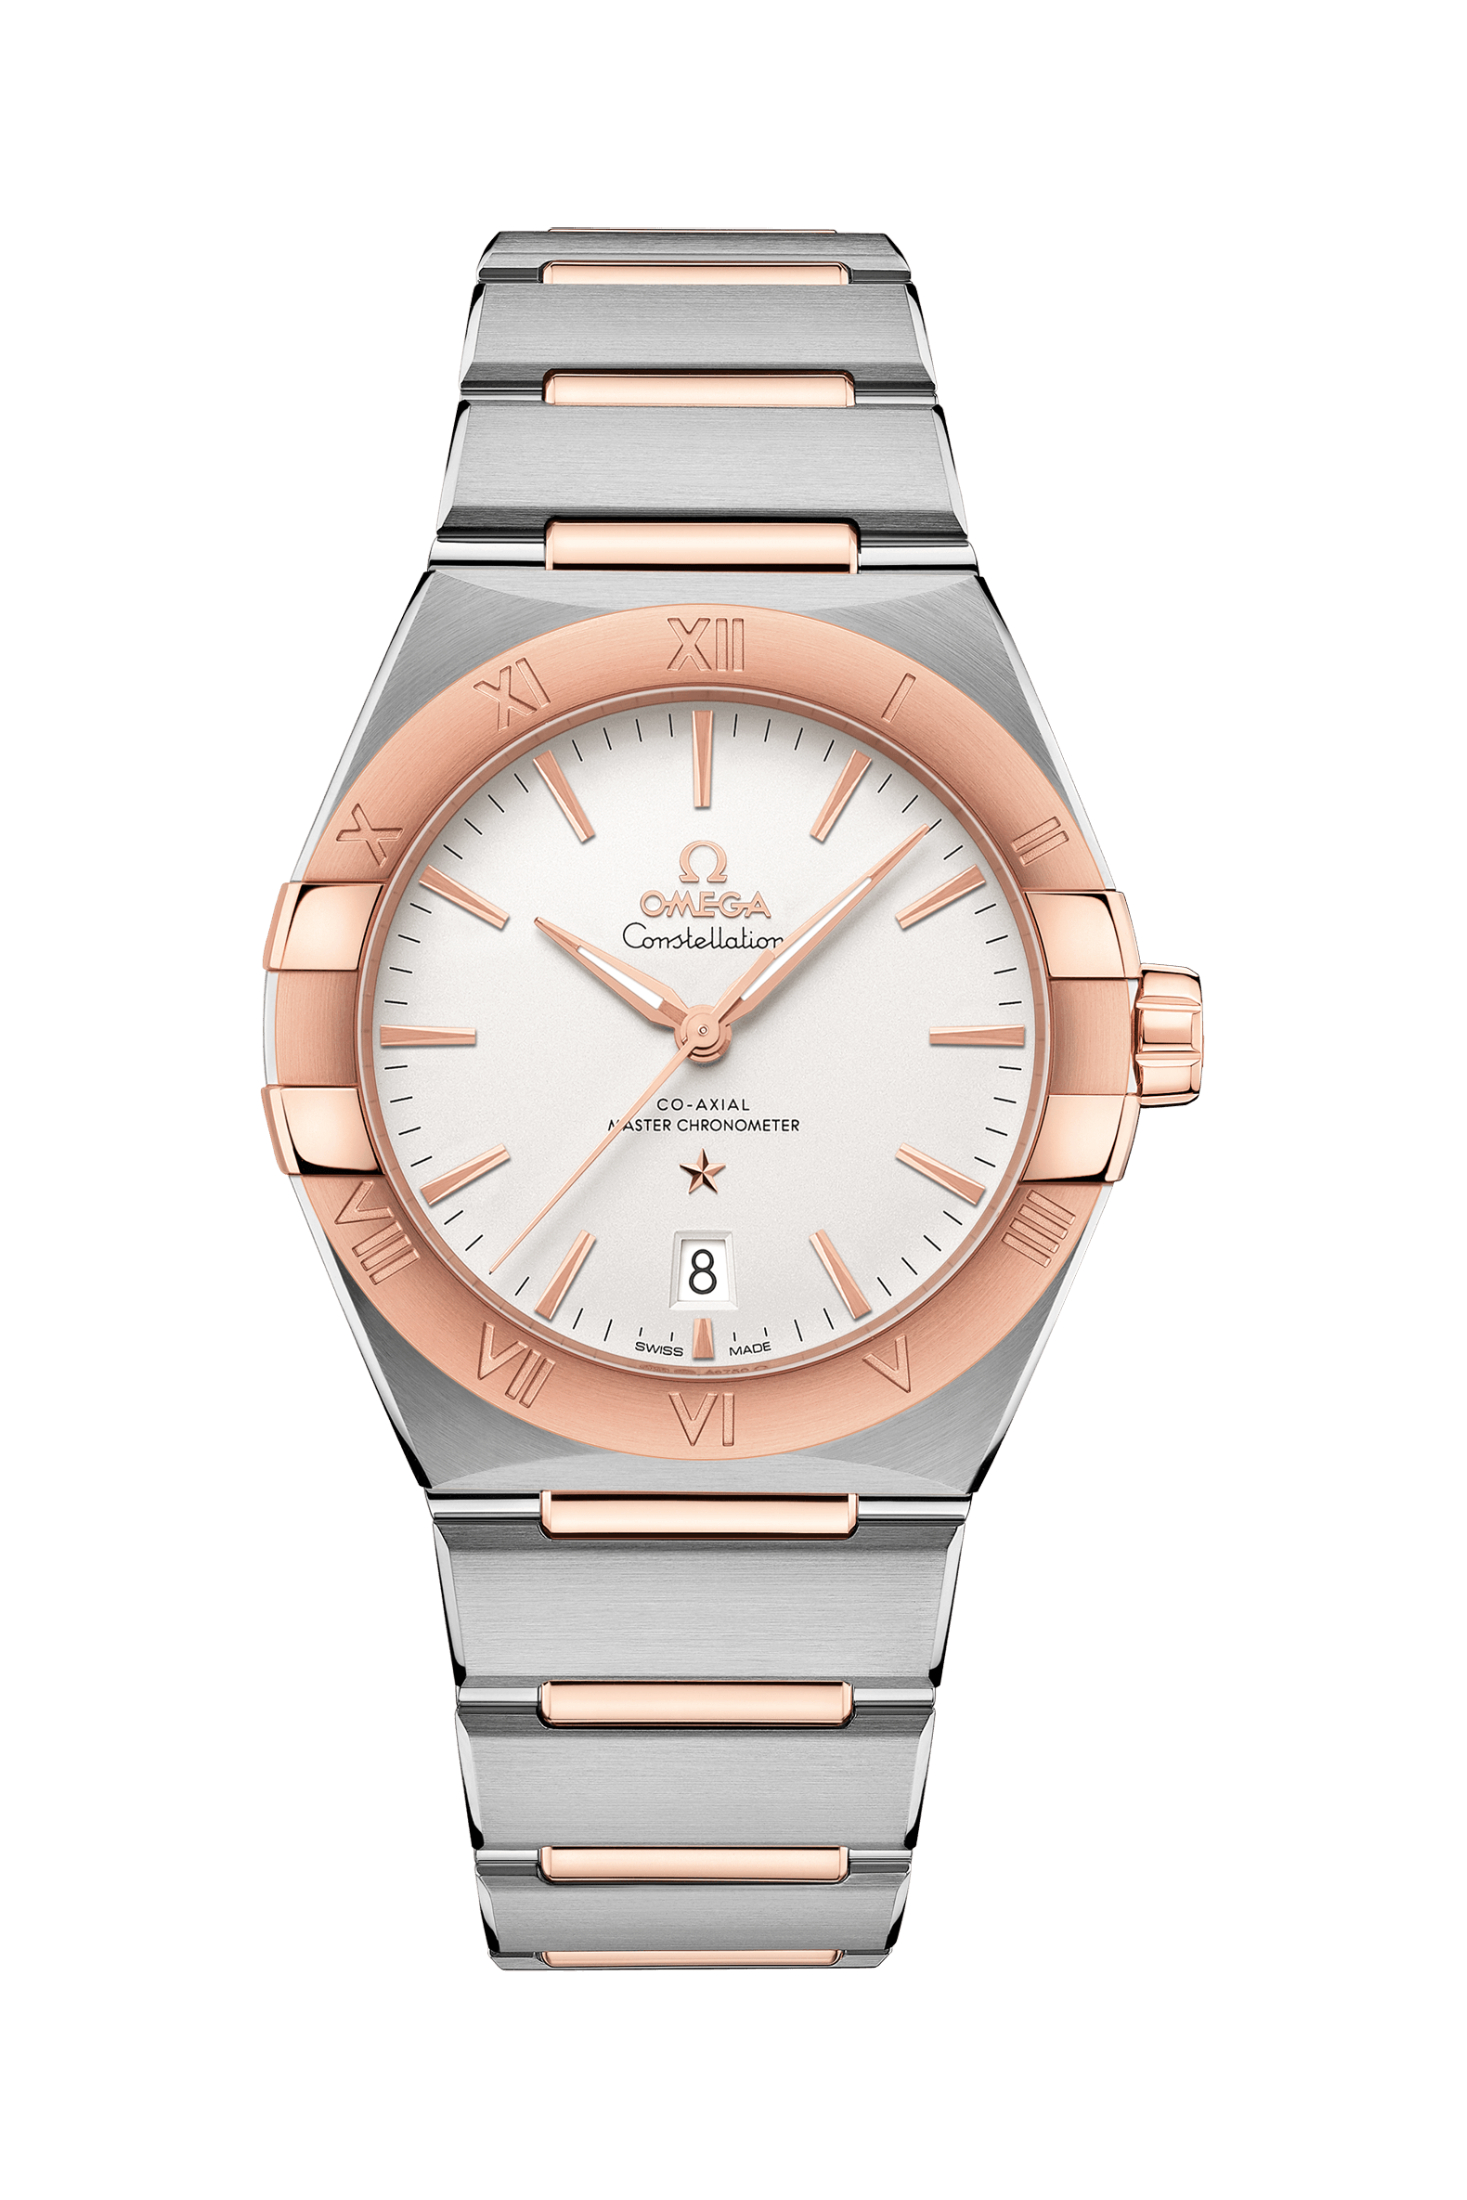 Men's watch / unisex  OMEGA, Constellation Co Axial Master Chronometer / 39mm, SKU: 131.20.39.20.02.001 | watchapproach.com